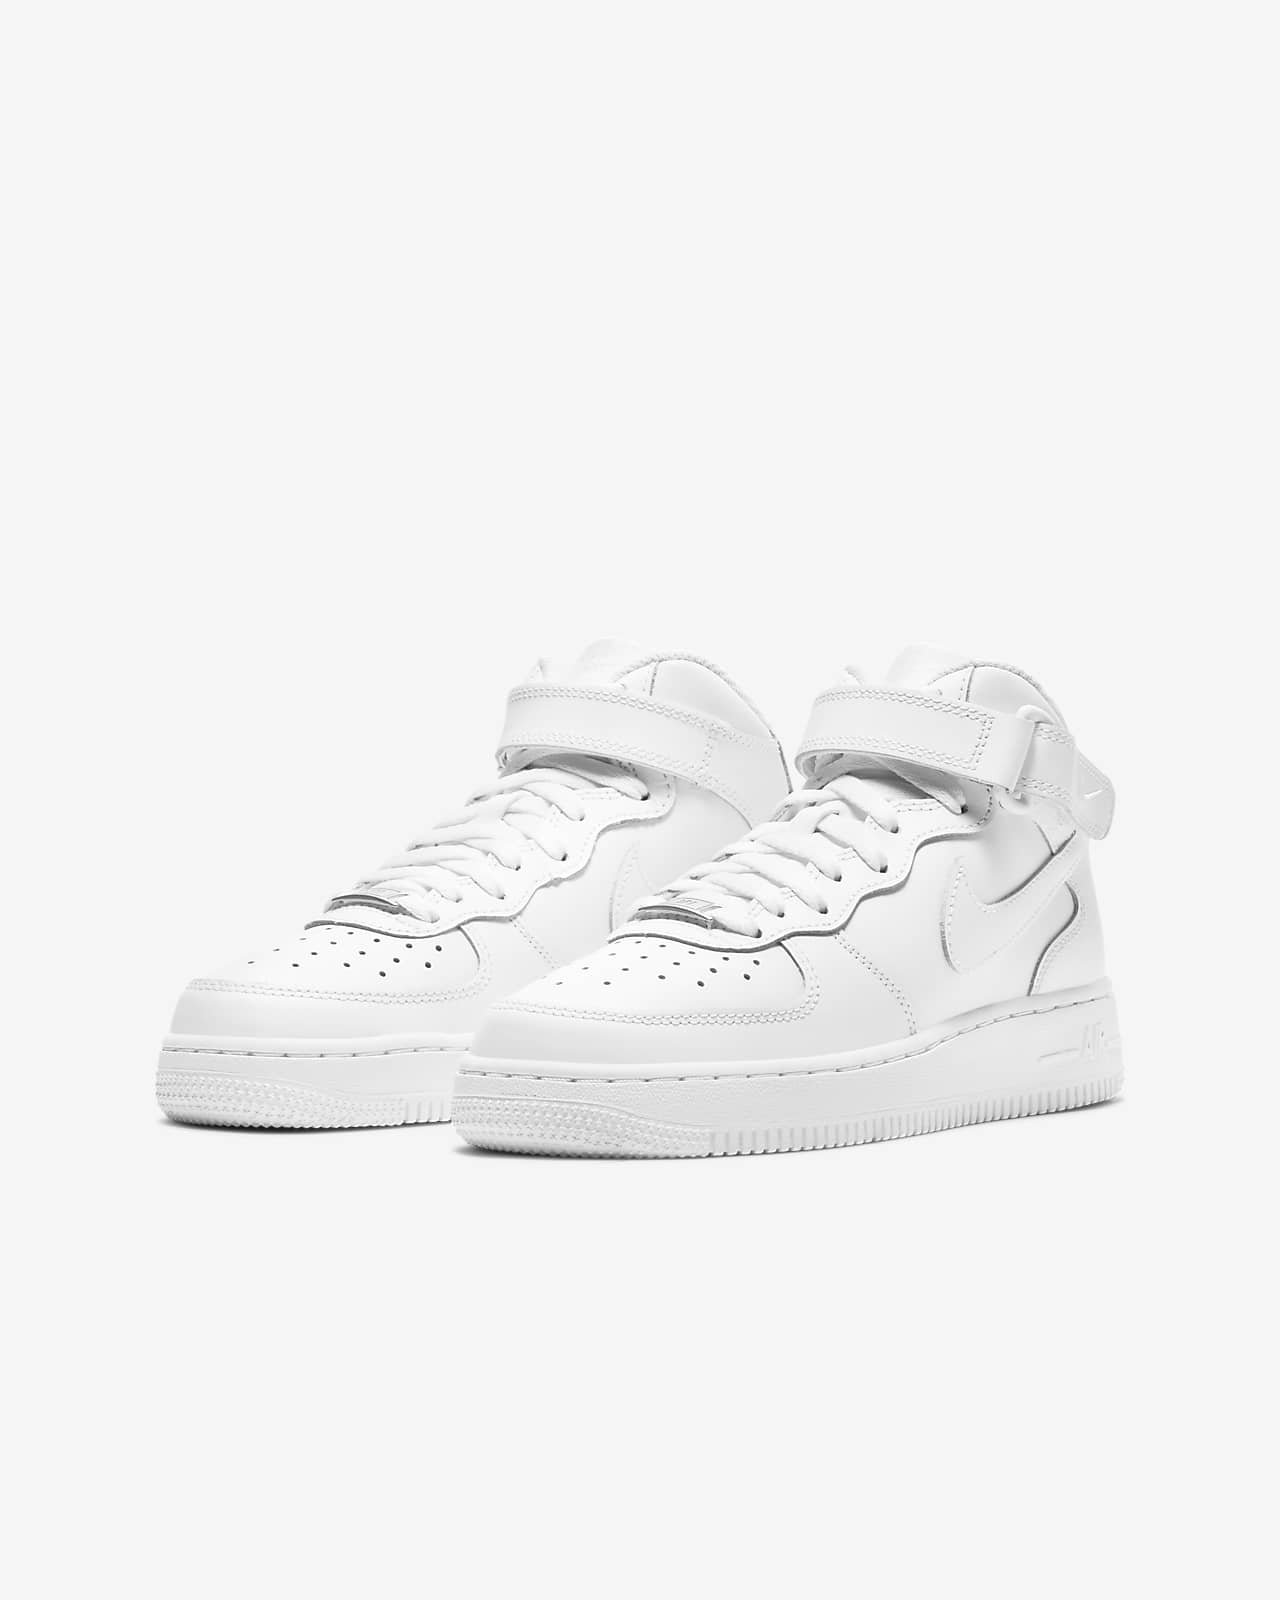 Nike Boy's Air Force 1 Mid Top Sneaker, White, 6